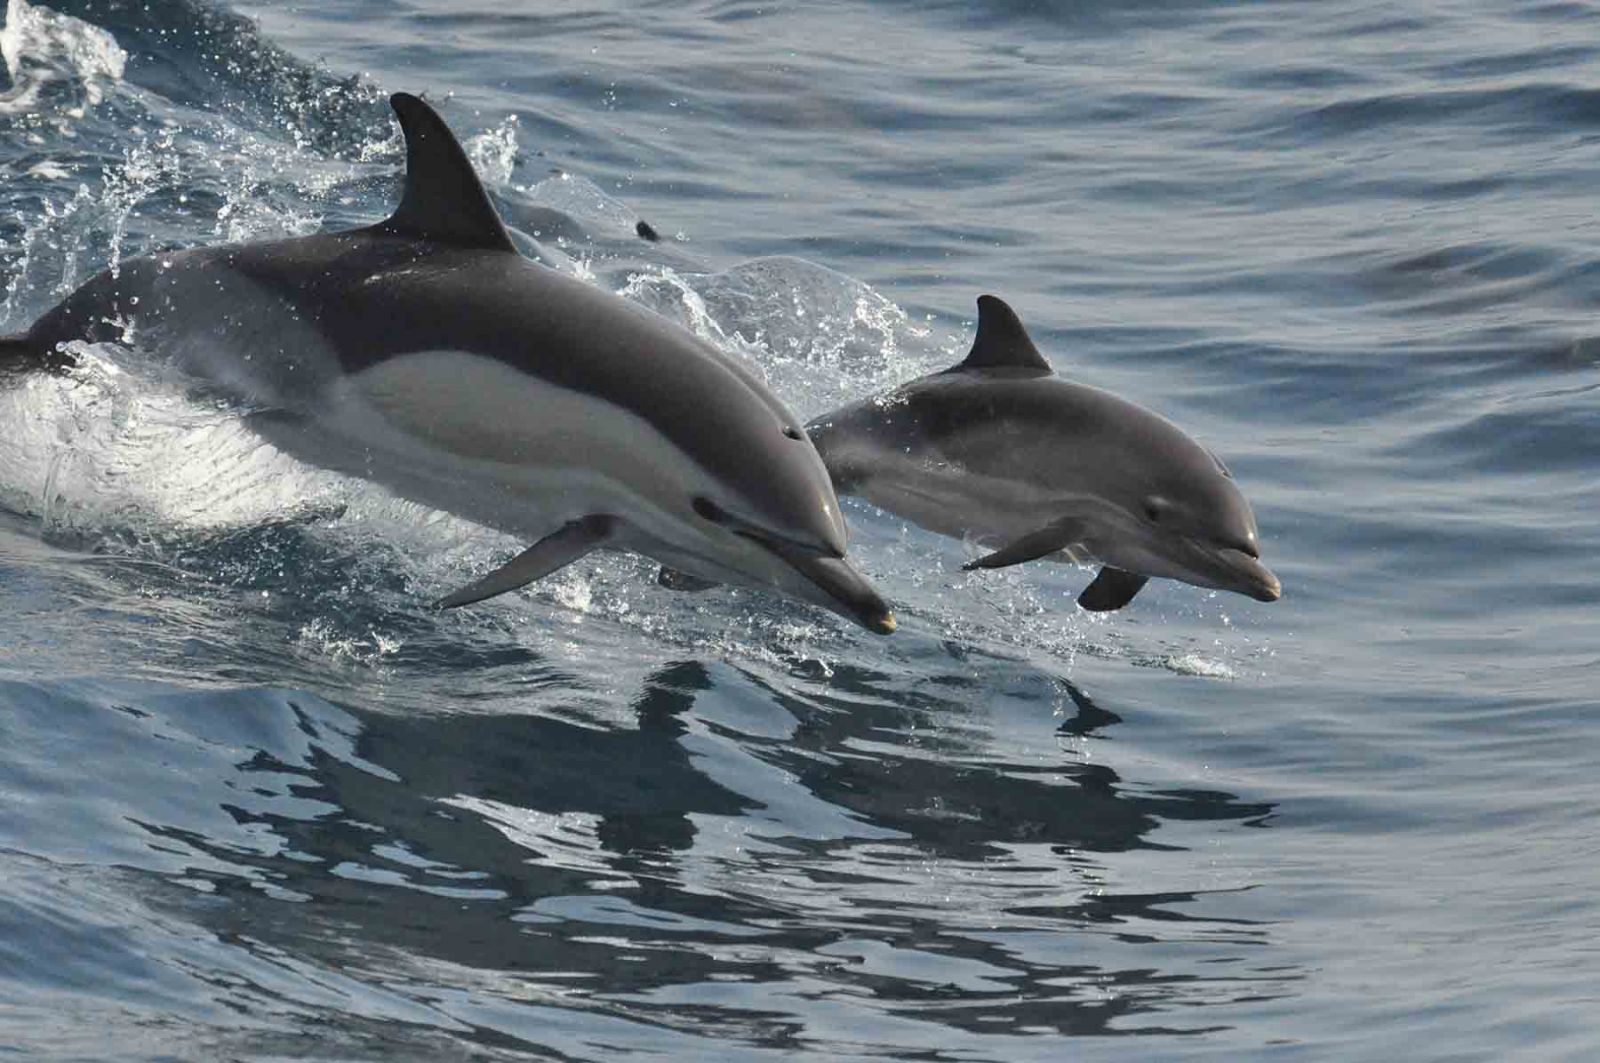 A bottlenose dolphin mom and baby